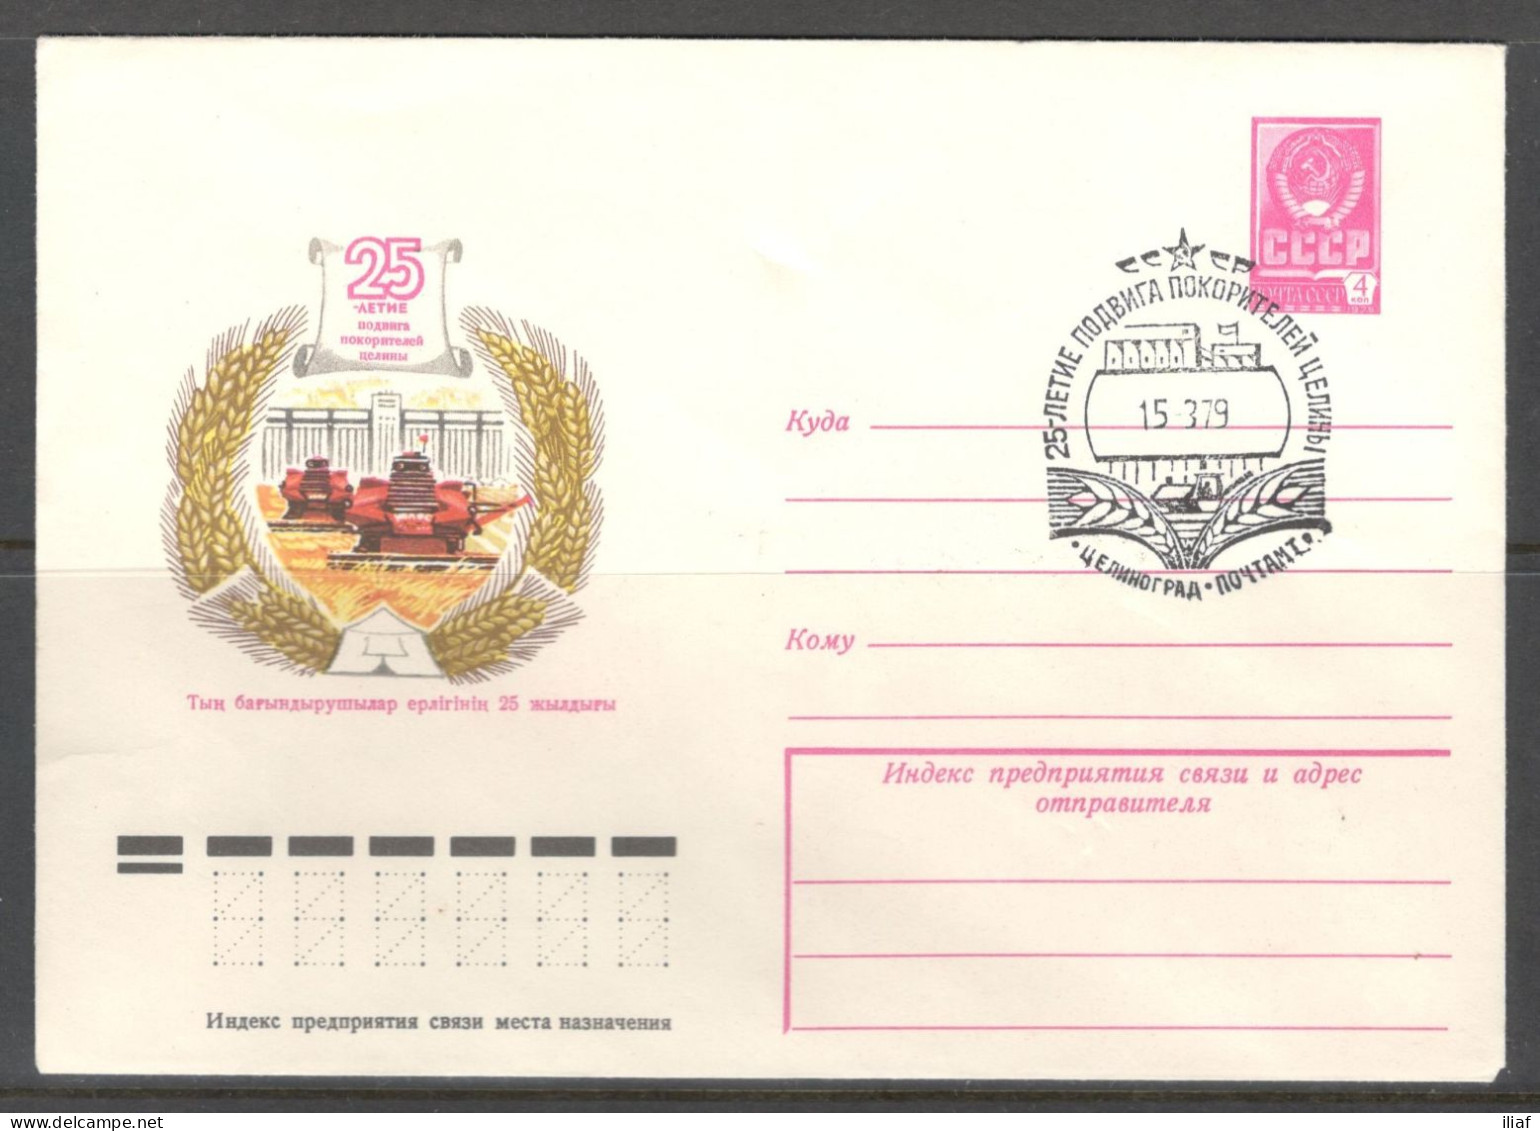 RUSSIA & USSR. 25th Anniversary Of The Virgin Lands Campaign.  Illustrated Envelope With Special Cancellation - Agriculture